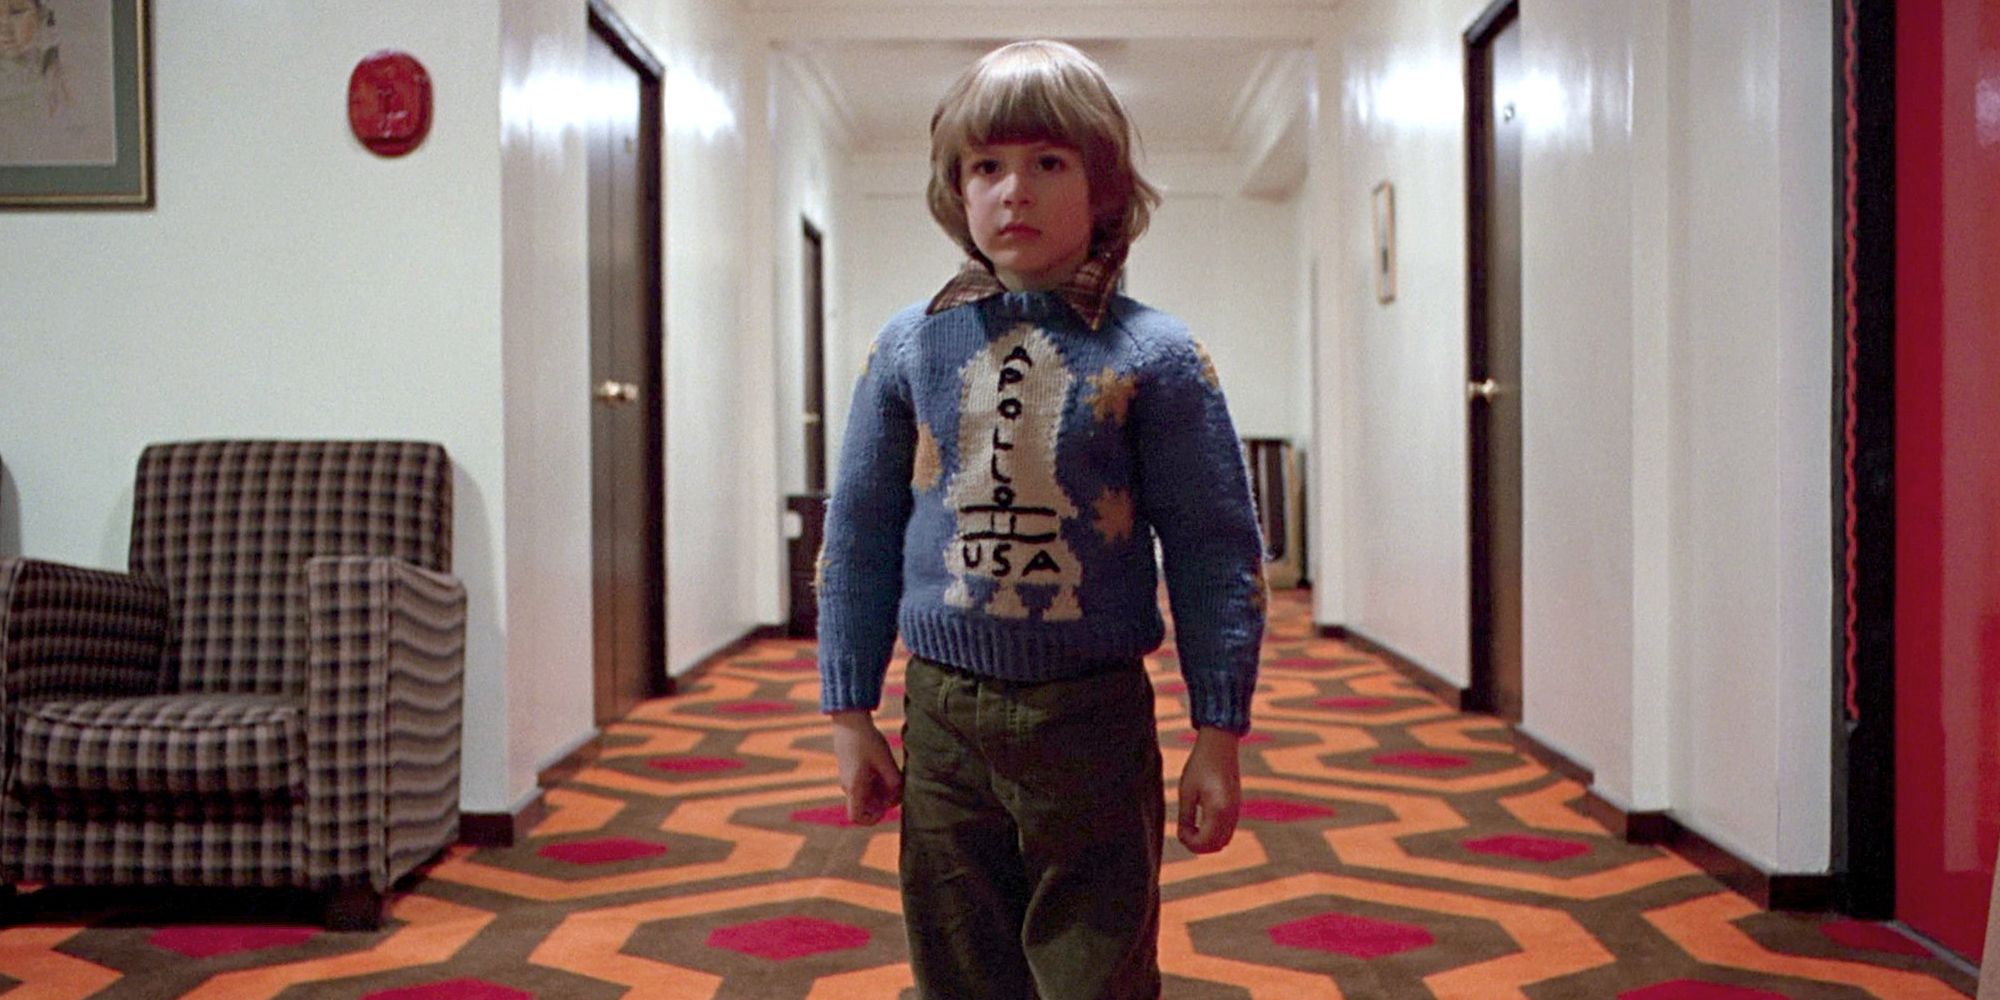 Danny with an Apollo 11 sweater in The Shining